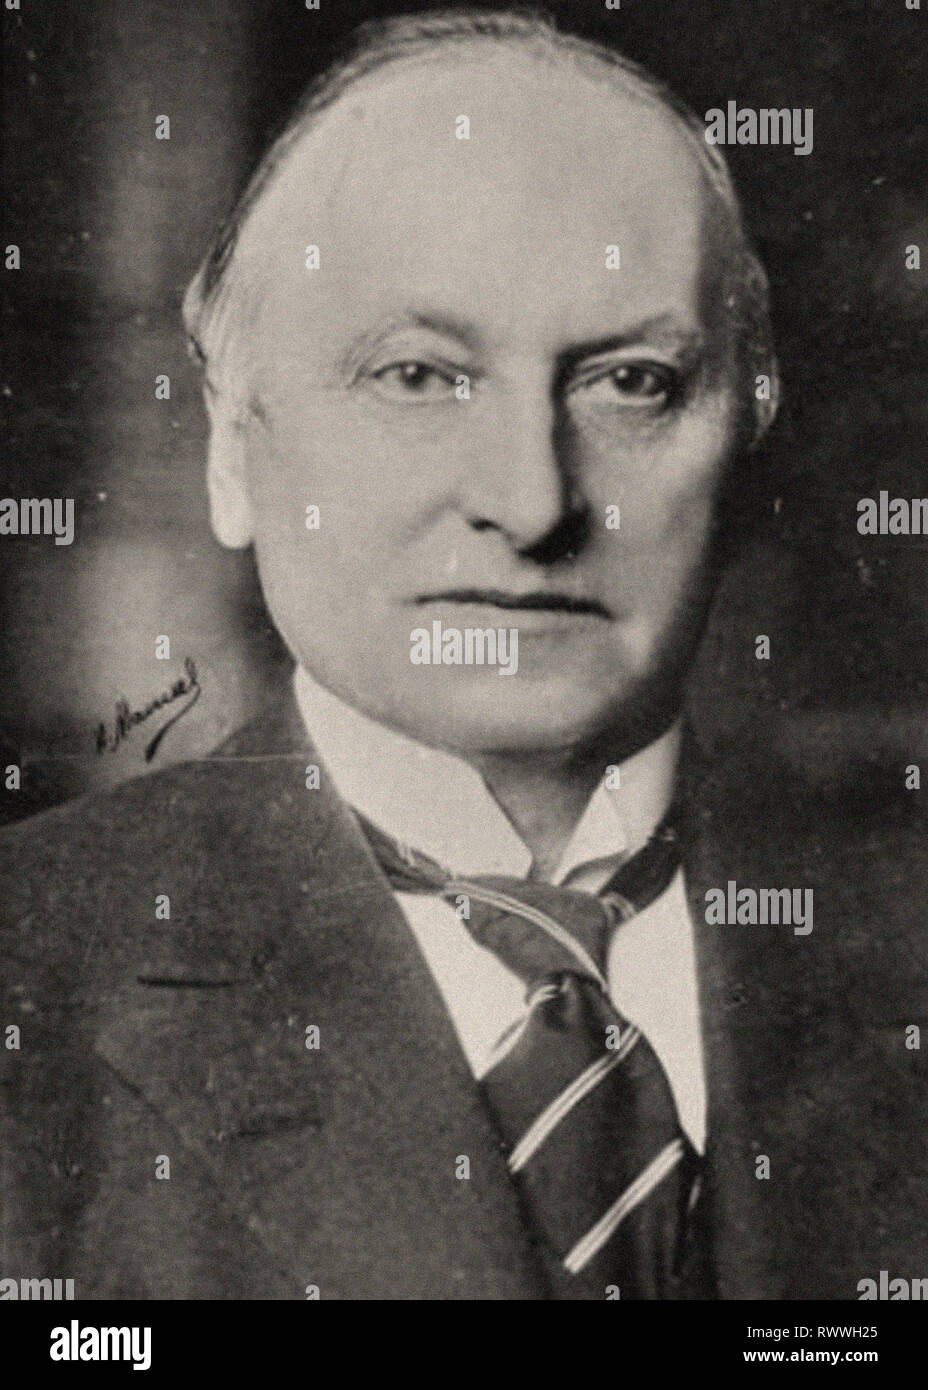 photographic-portrait-of-lord-curzon-RWWH25.jpg